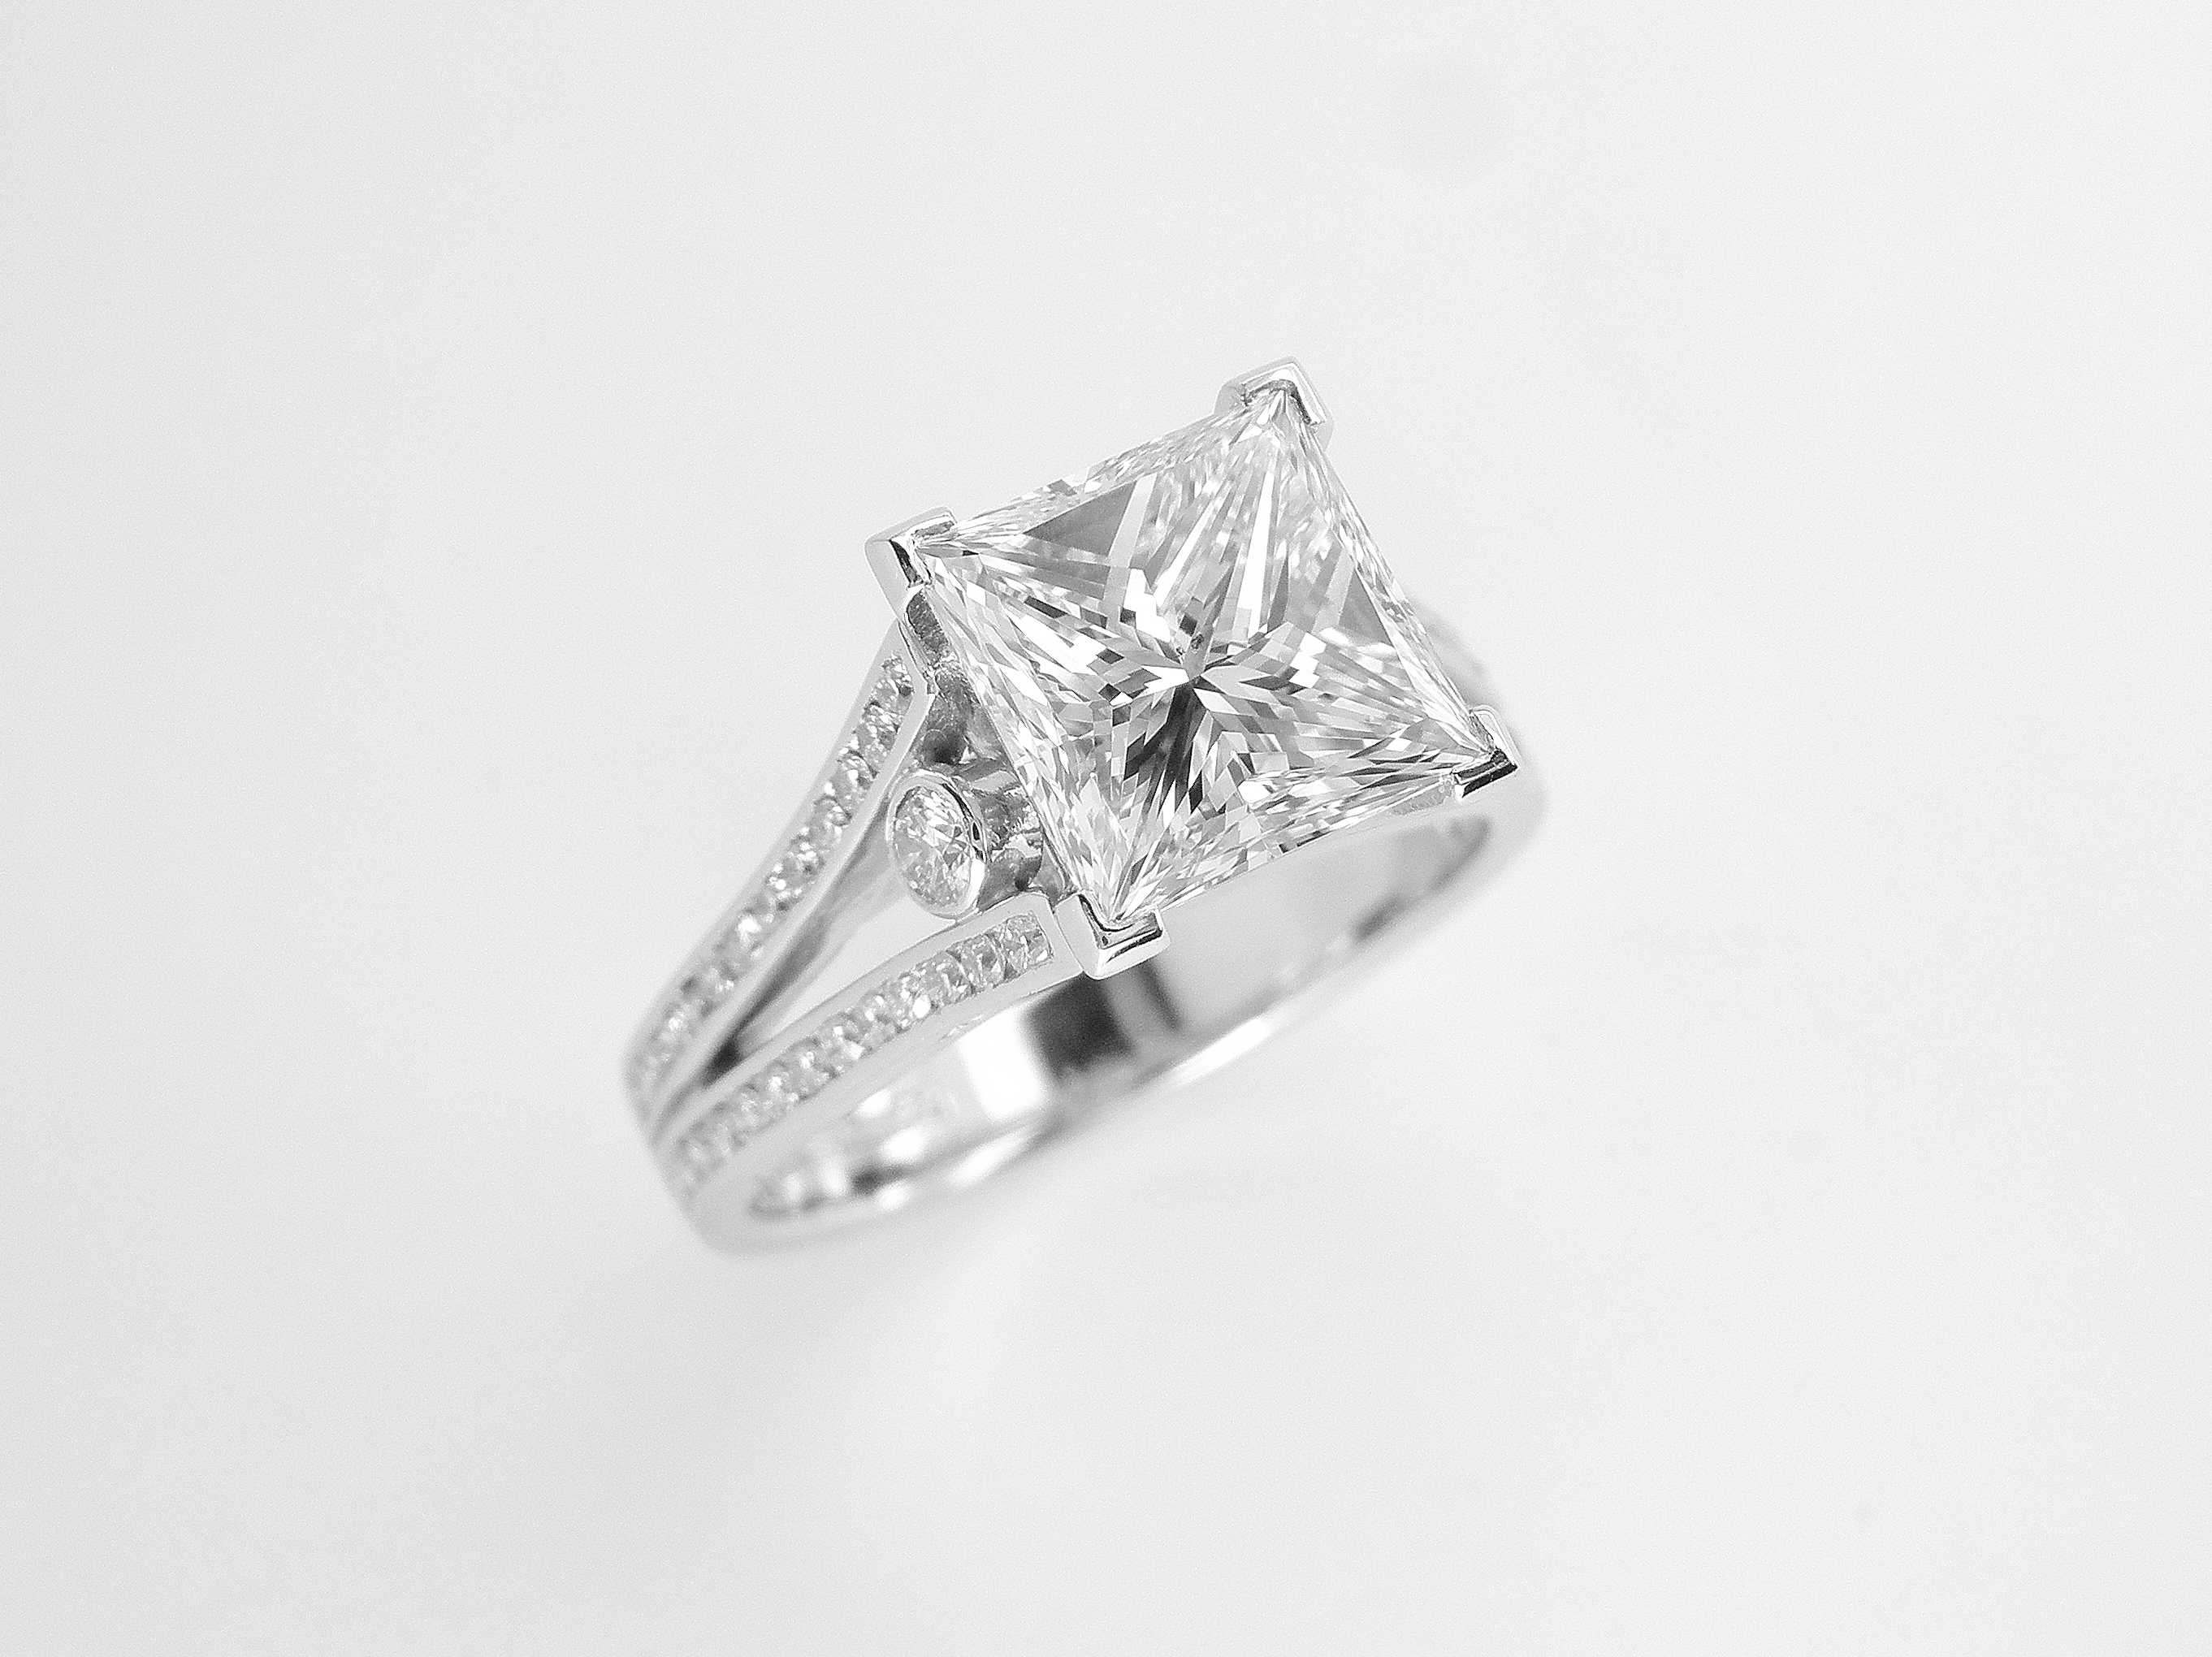 A 2.01ct. 'G' colour Princess cut diamond mounted in a split shoulder platinum ring mount with small round brilliant cut diamonds channel set in shoulders. Ideal diamond size 1.5ct to 5ct.